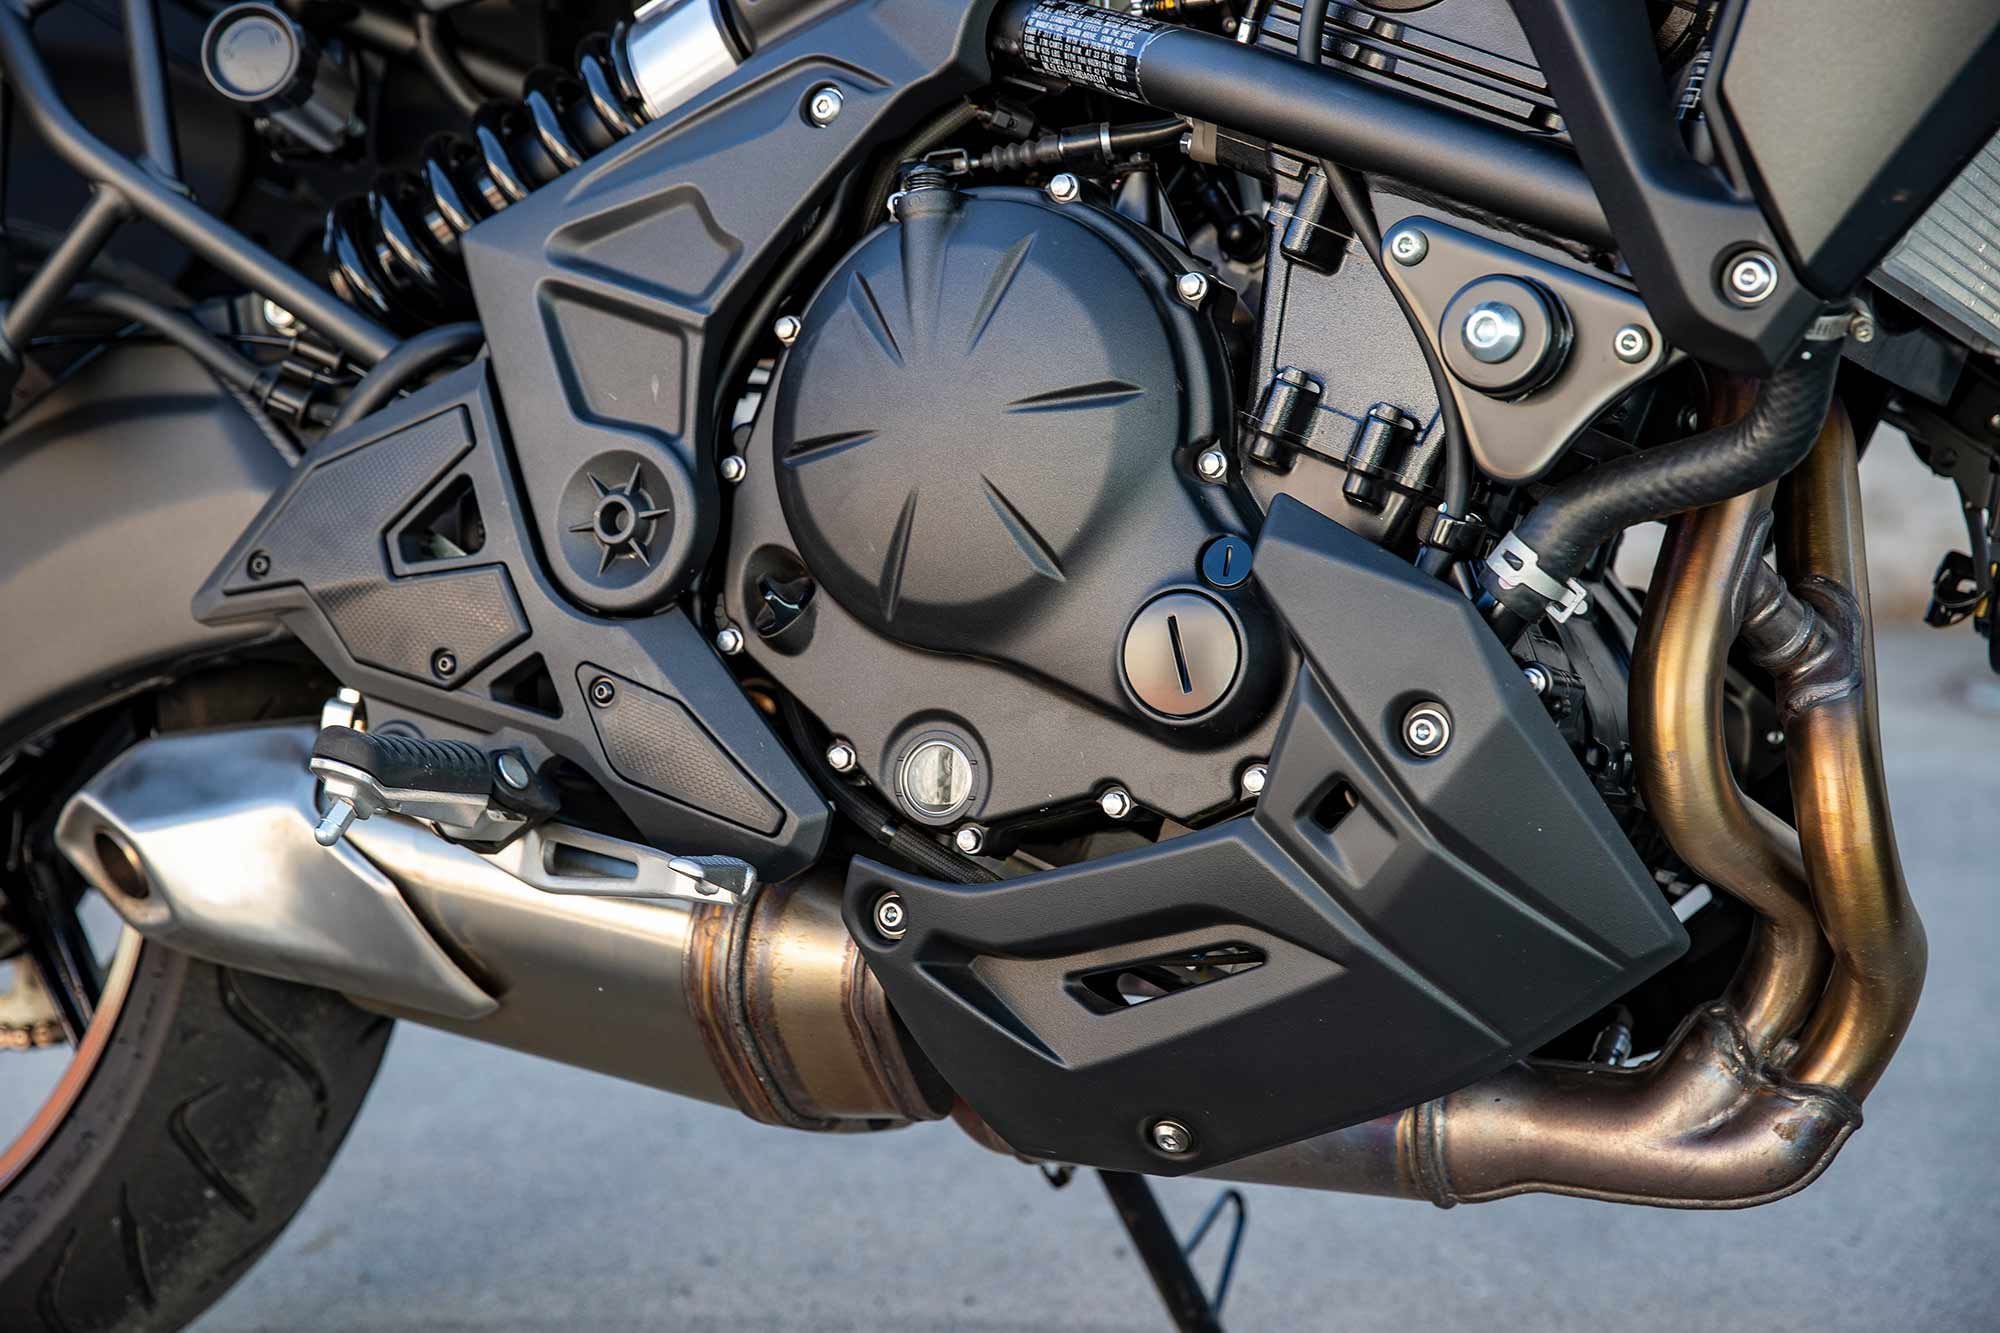 The Versys 650 produces the least amount of peak power, 59.32 hp at 8,340 rpm.